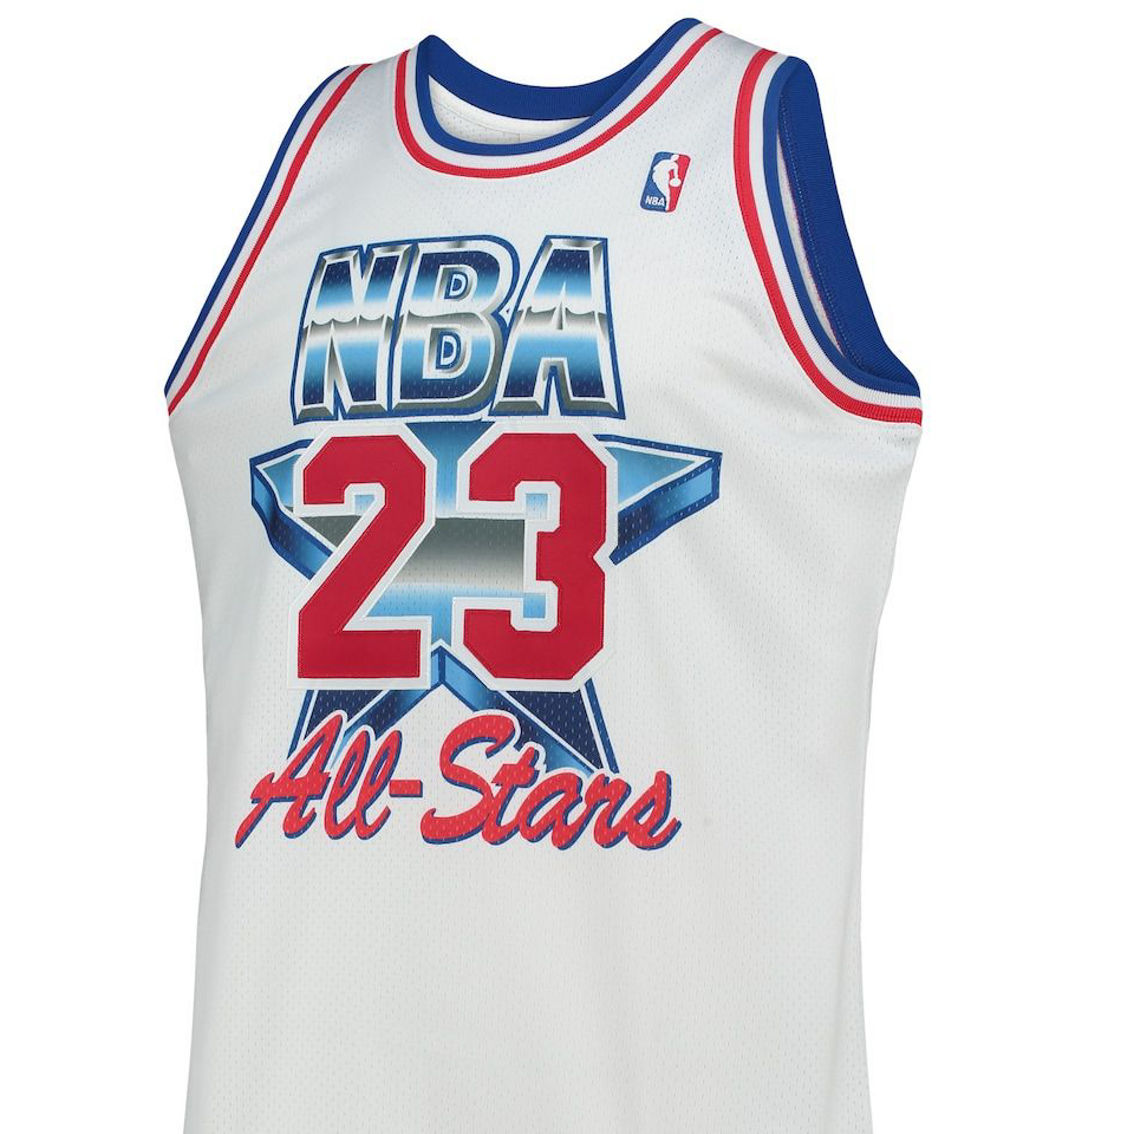 Mitchell & Ness Men's Michael Jordan White Eastern Conference Hardwood Classics 1992 NBA All-Star Game Authentic Jersey - Image 3 of 4